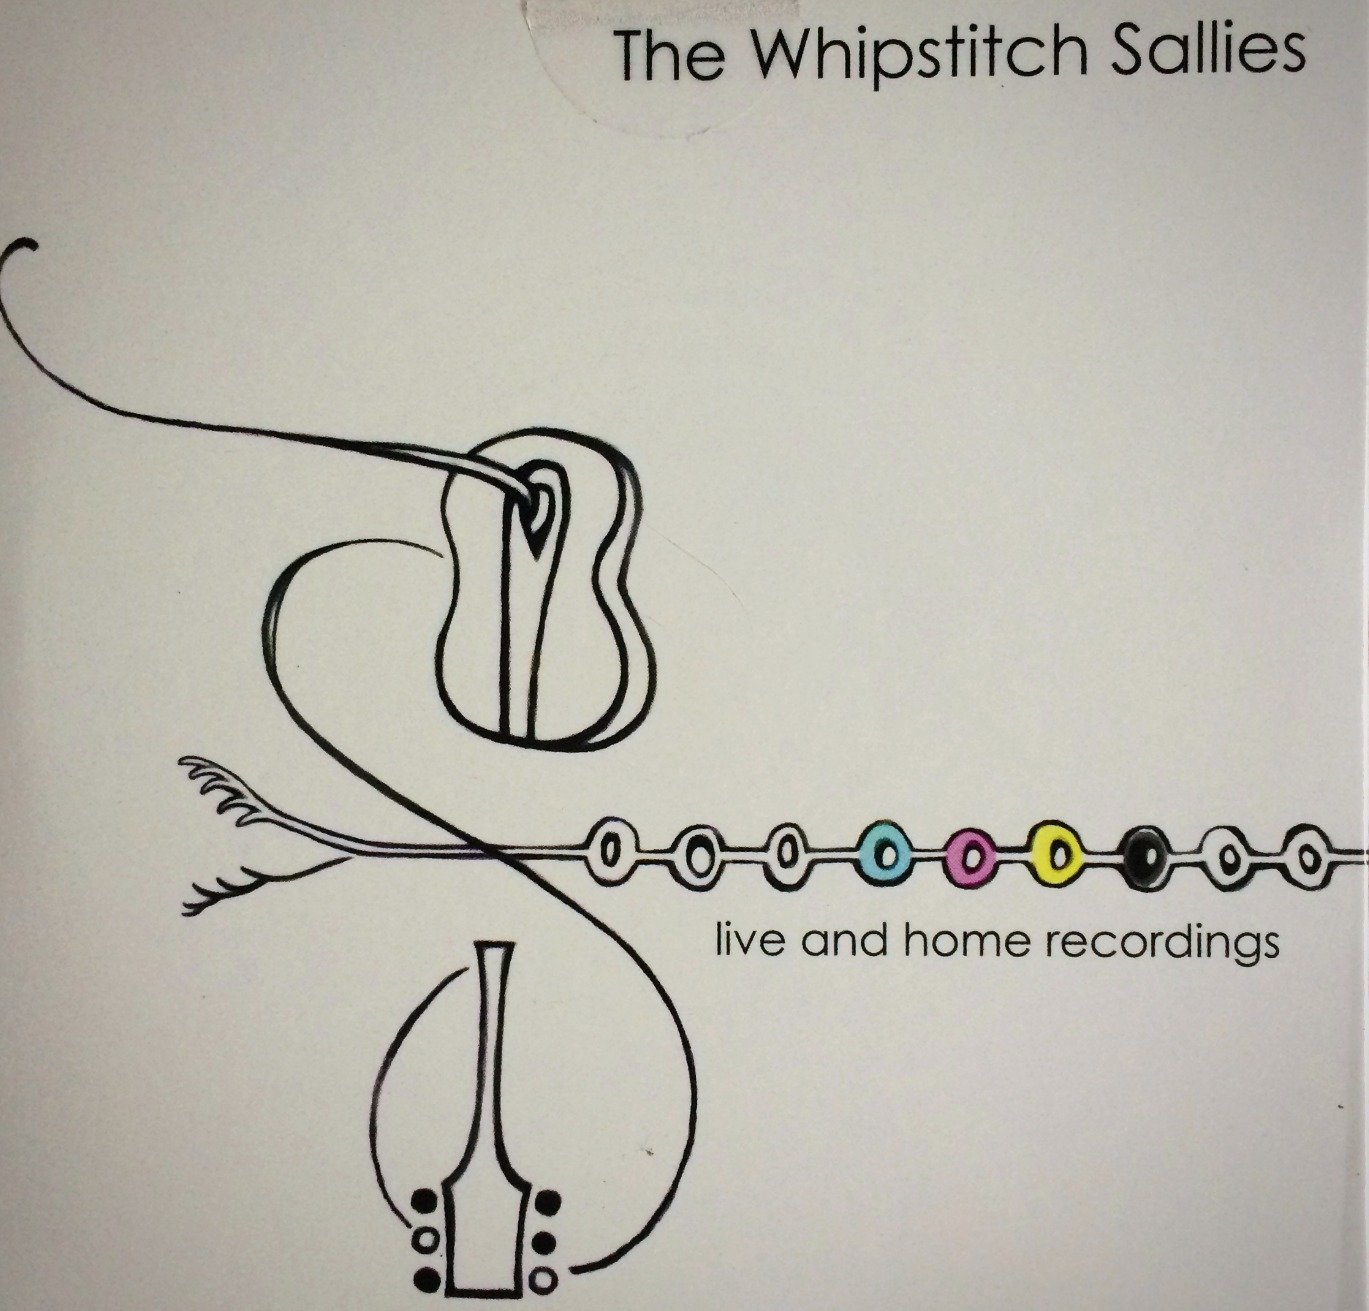 live and home recordings (The Whipstitch Sallies 2014)